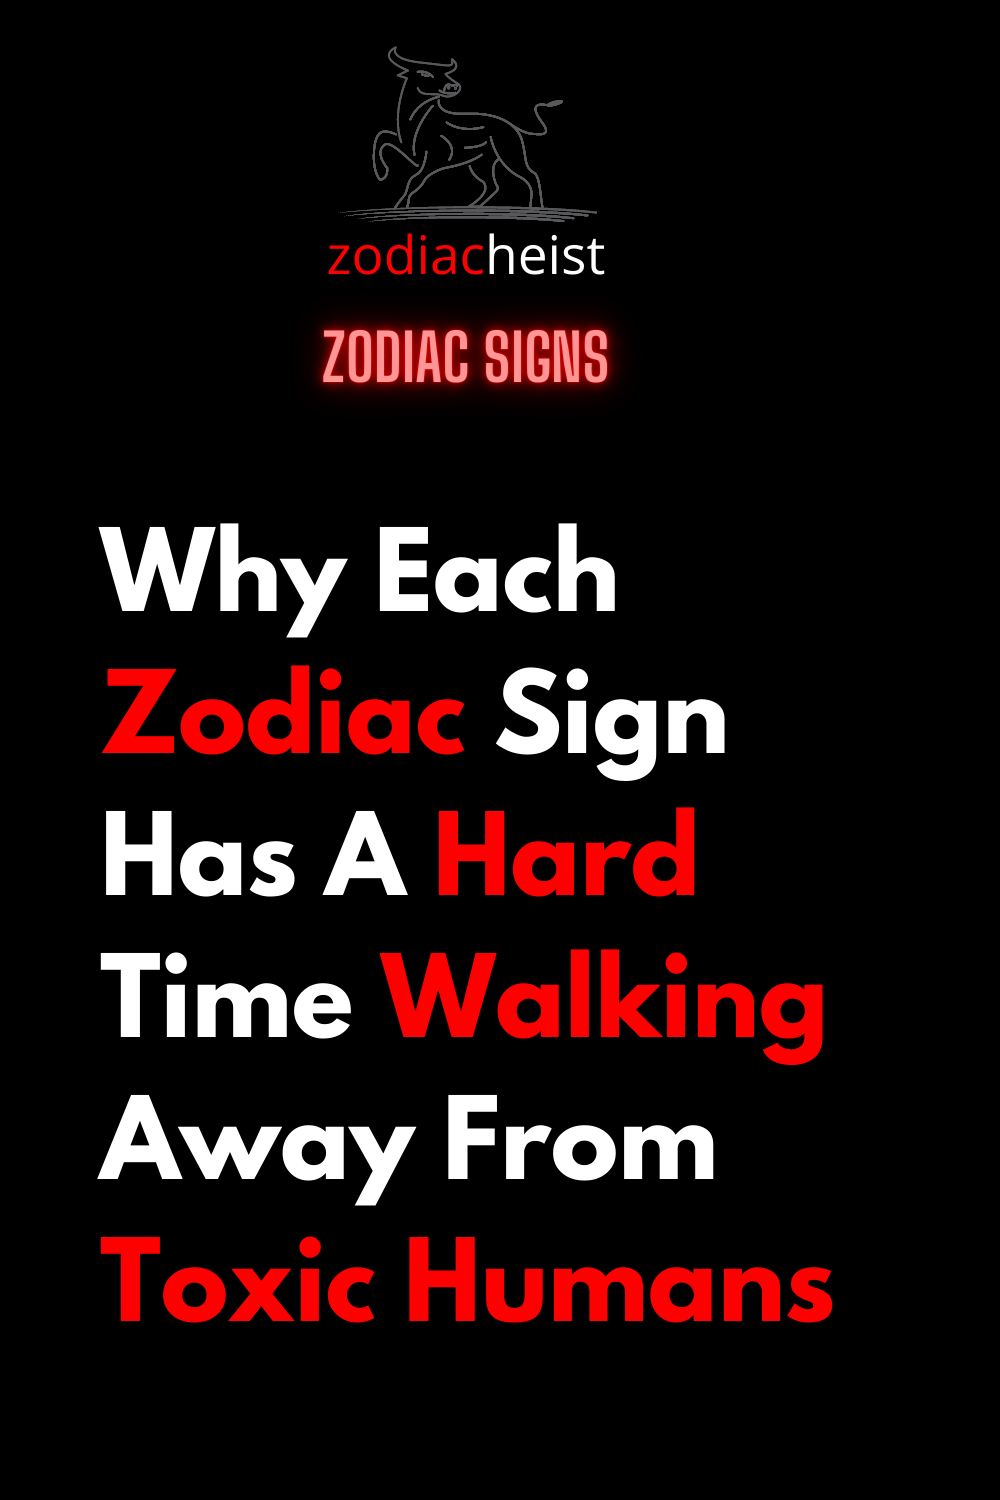 Why Each Zodiac Sign Has A Hard Time Walking Away From Toxic Humans